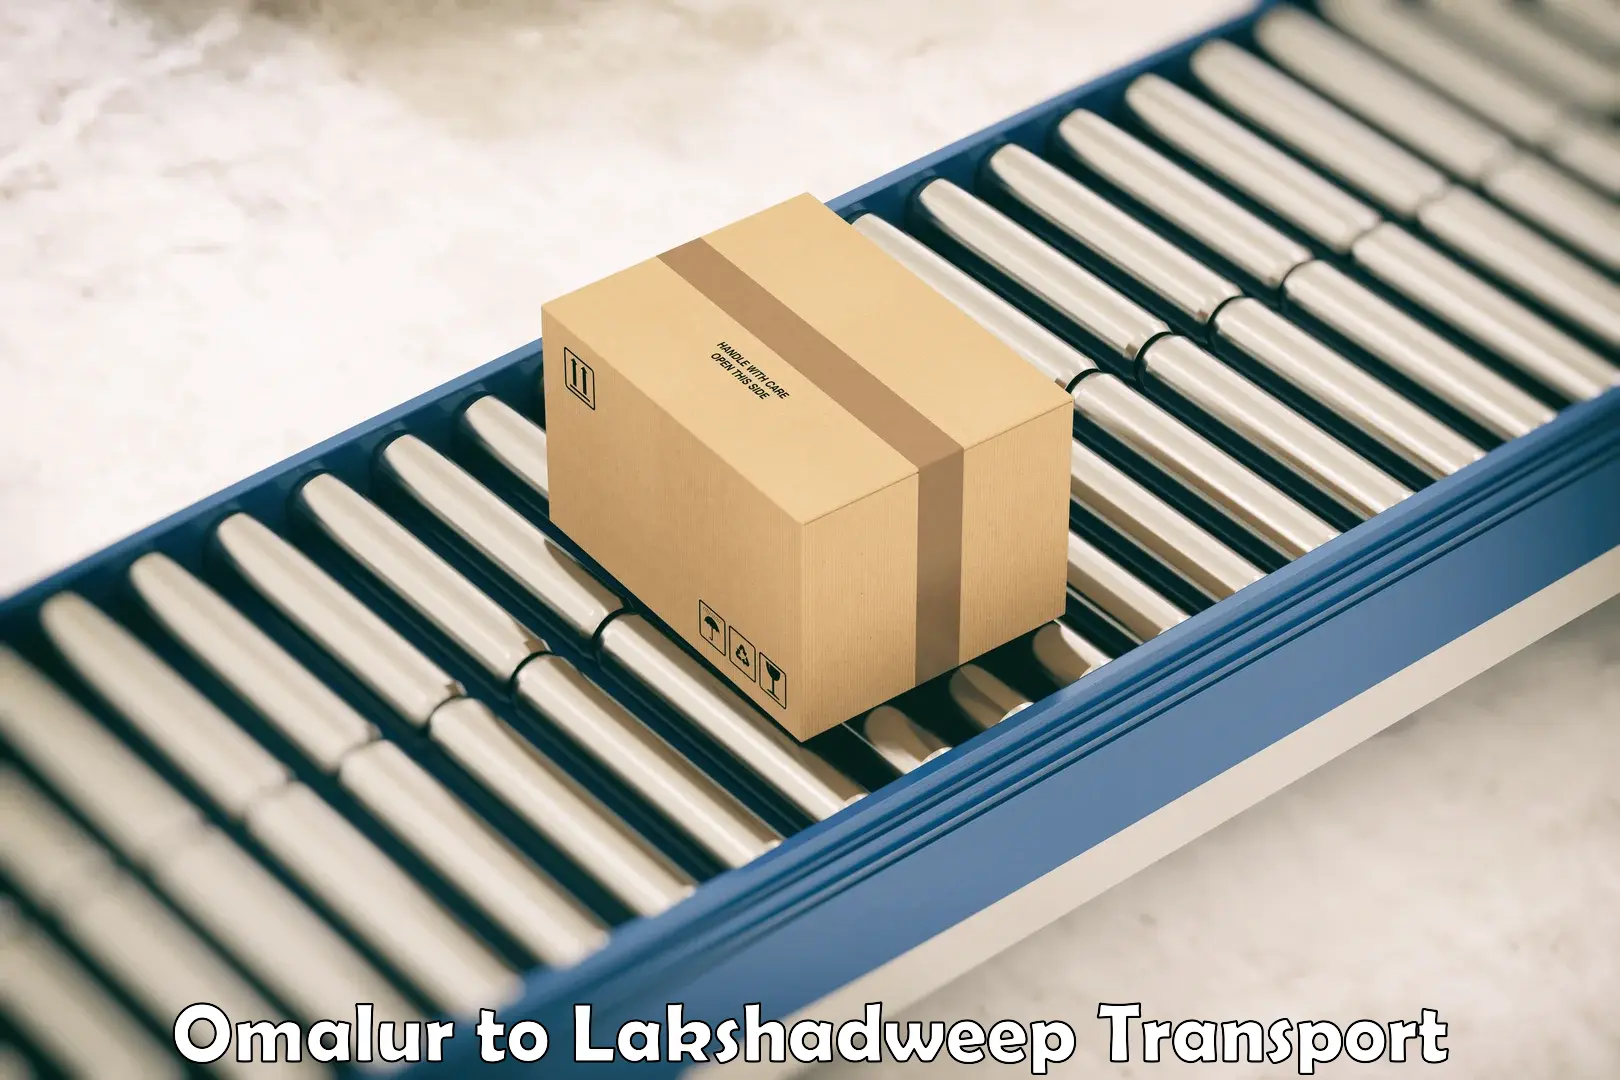 Truck transport companies in India Omalur to Lakshadweep